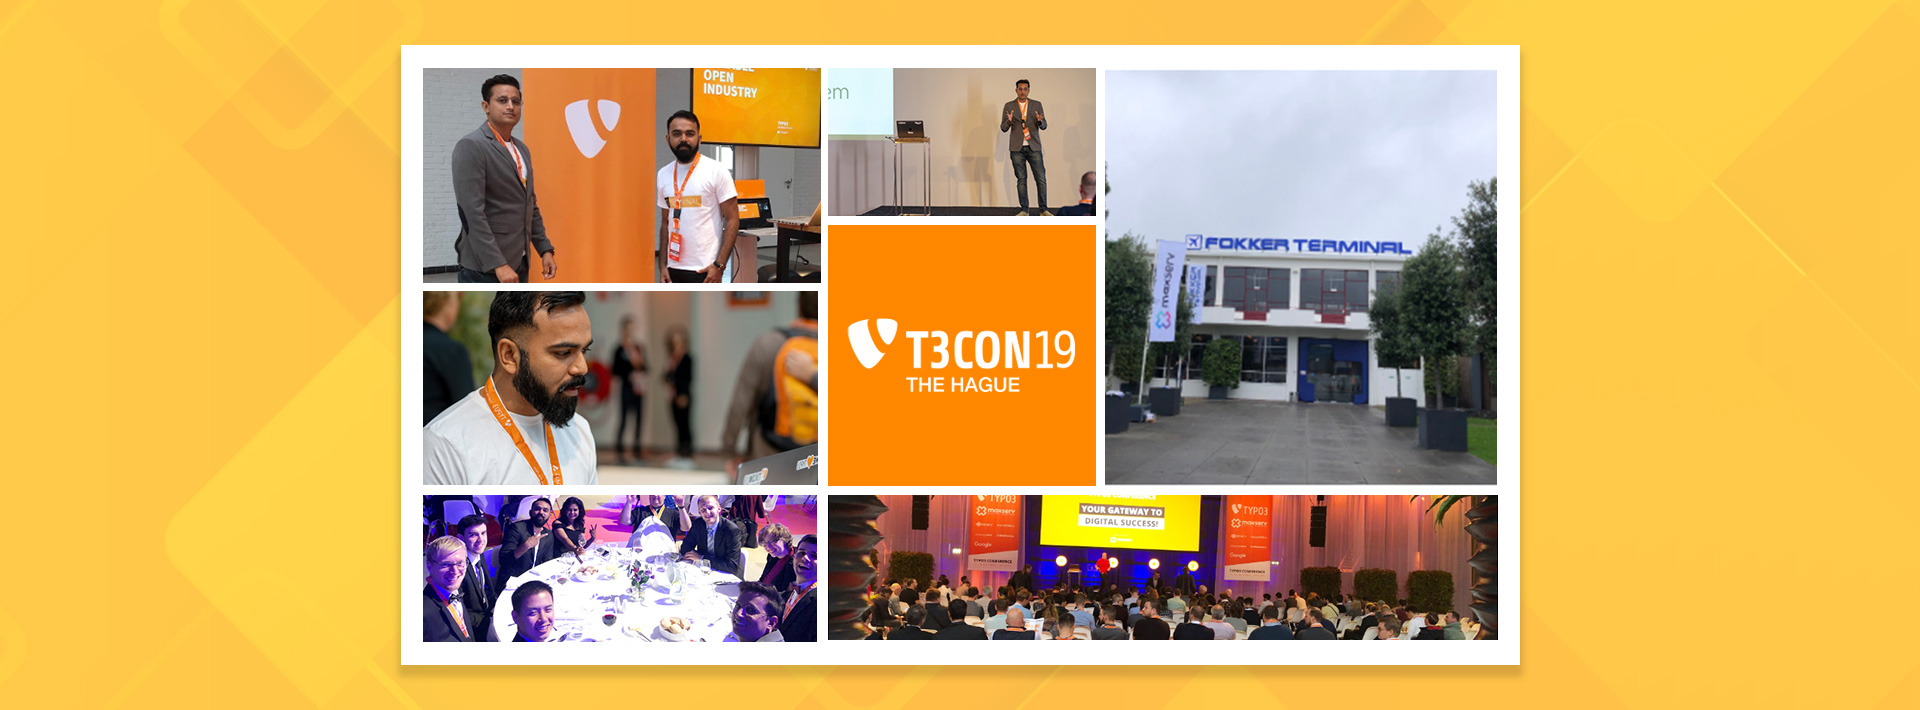 [Translate to German:] TYPO3 Conference 2019